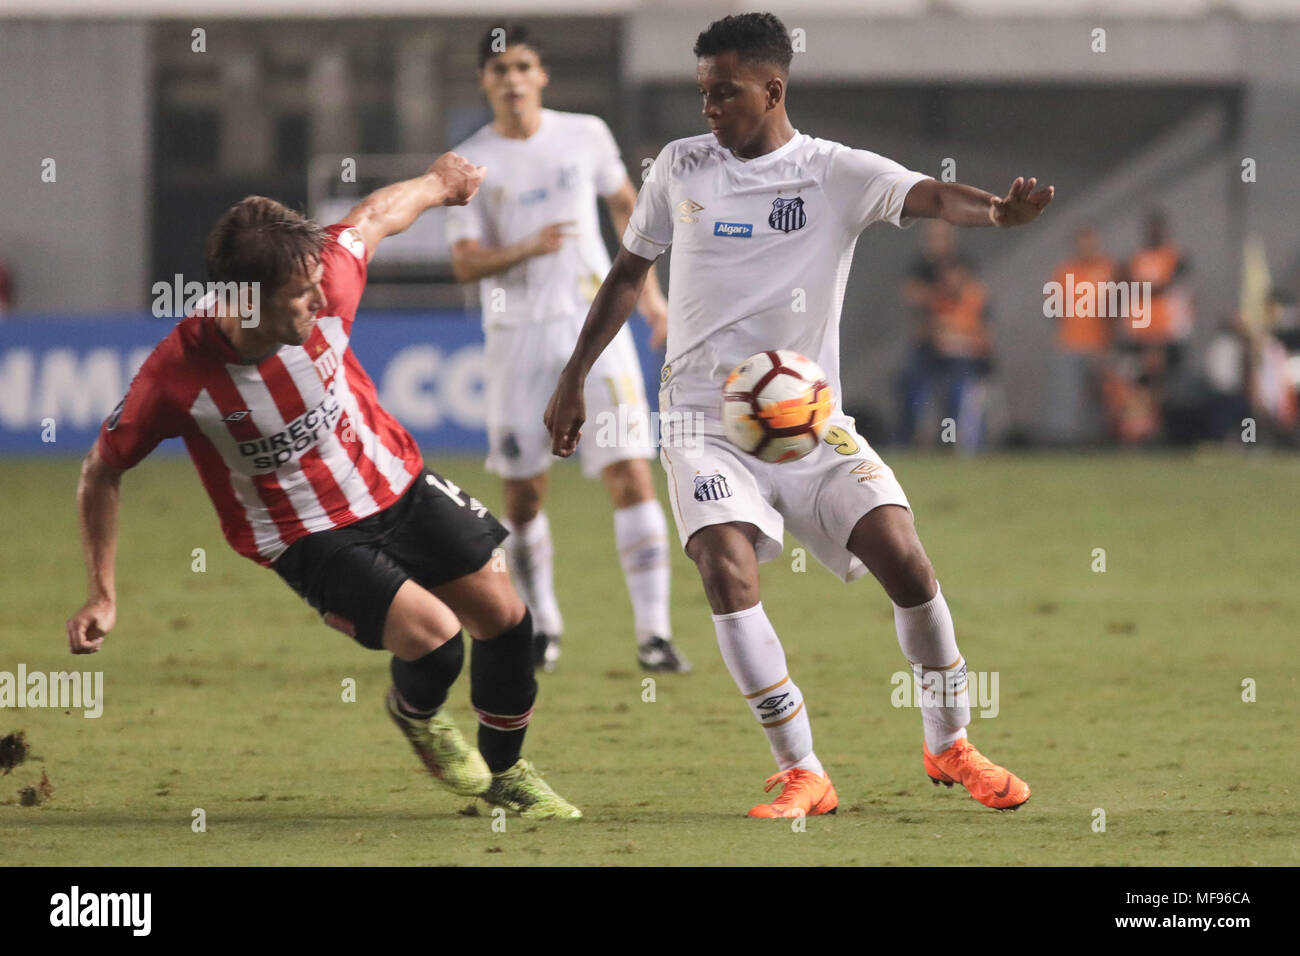 Santos, Brazil. 24th Apr, 2018. Rodrygo during the match between Santos and Estudiantes (Argentina) held at Vila Belmiro Stadium in Santos, SP. The match is valid for the 4th round of Group 6 of the 2018 Copa Libertadores. Credit: Ricardo Moreira/FotoArena/Alamy Live News Stock Photo